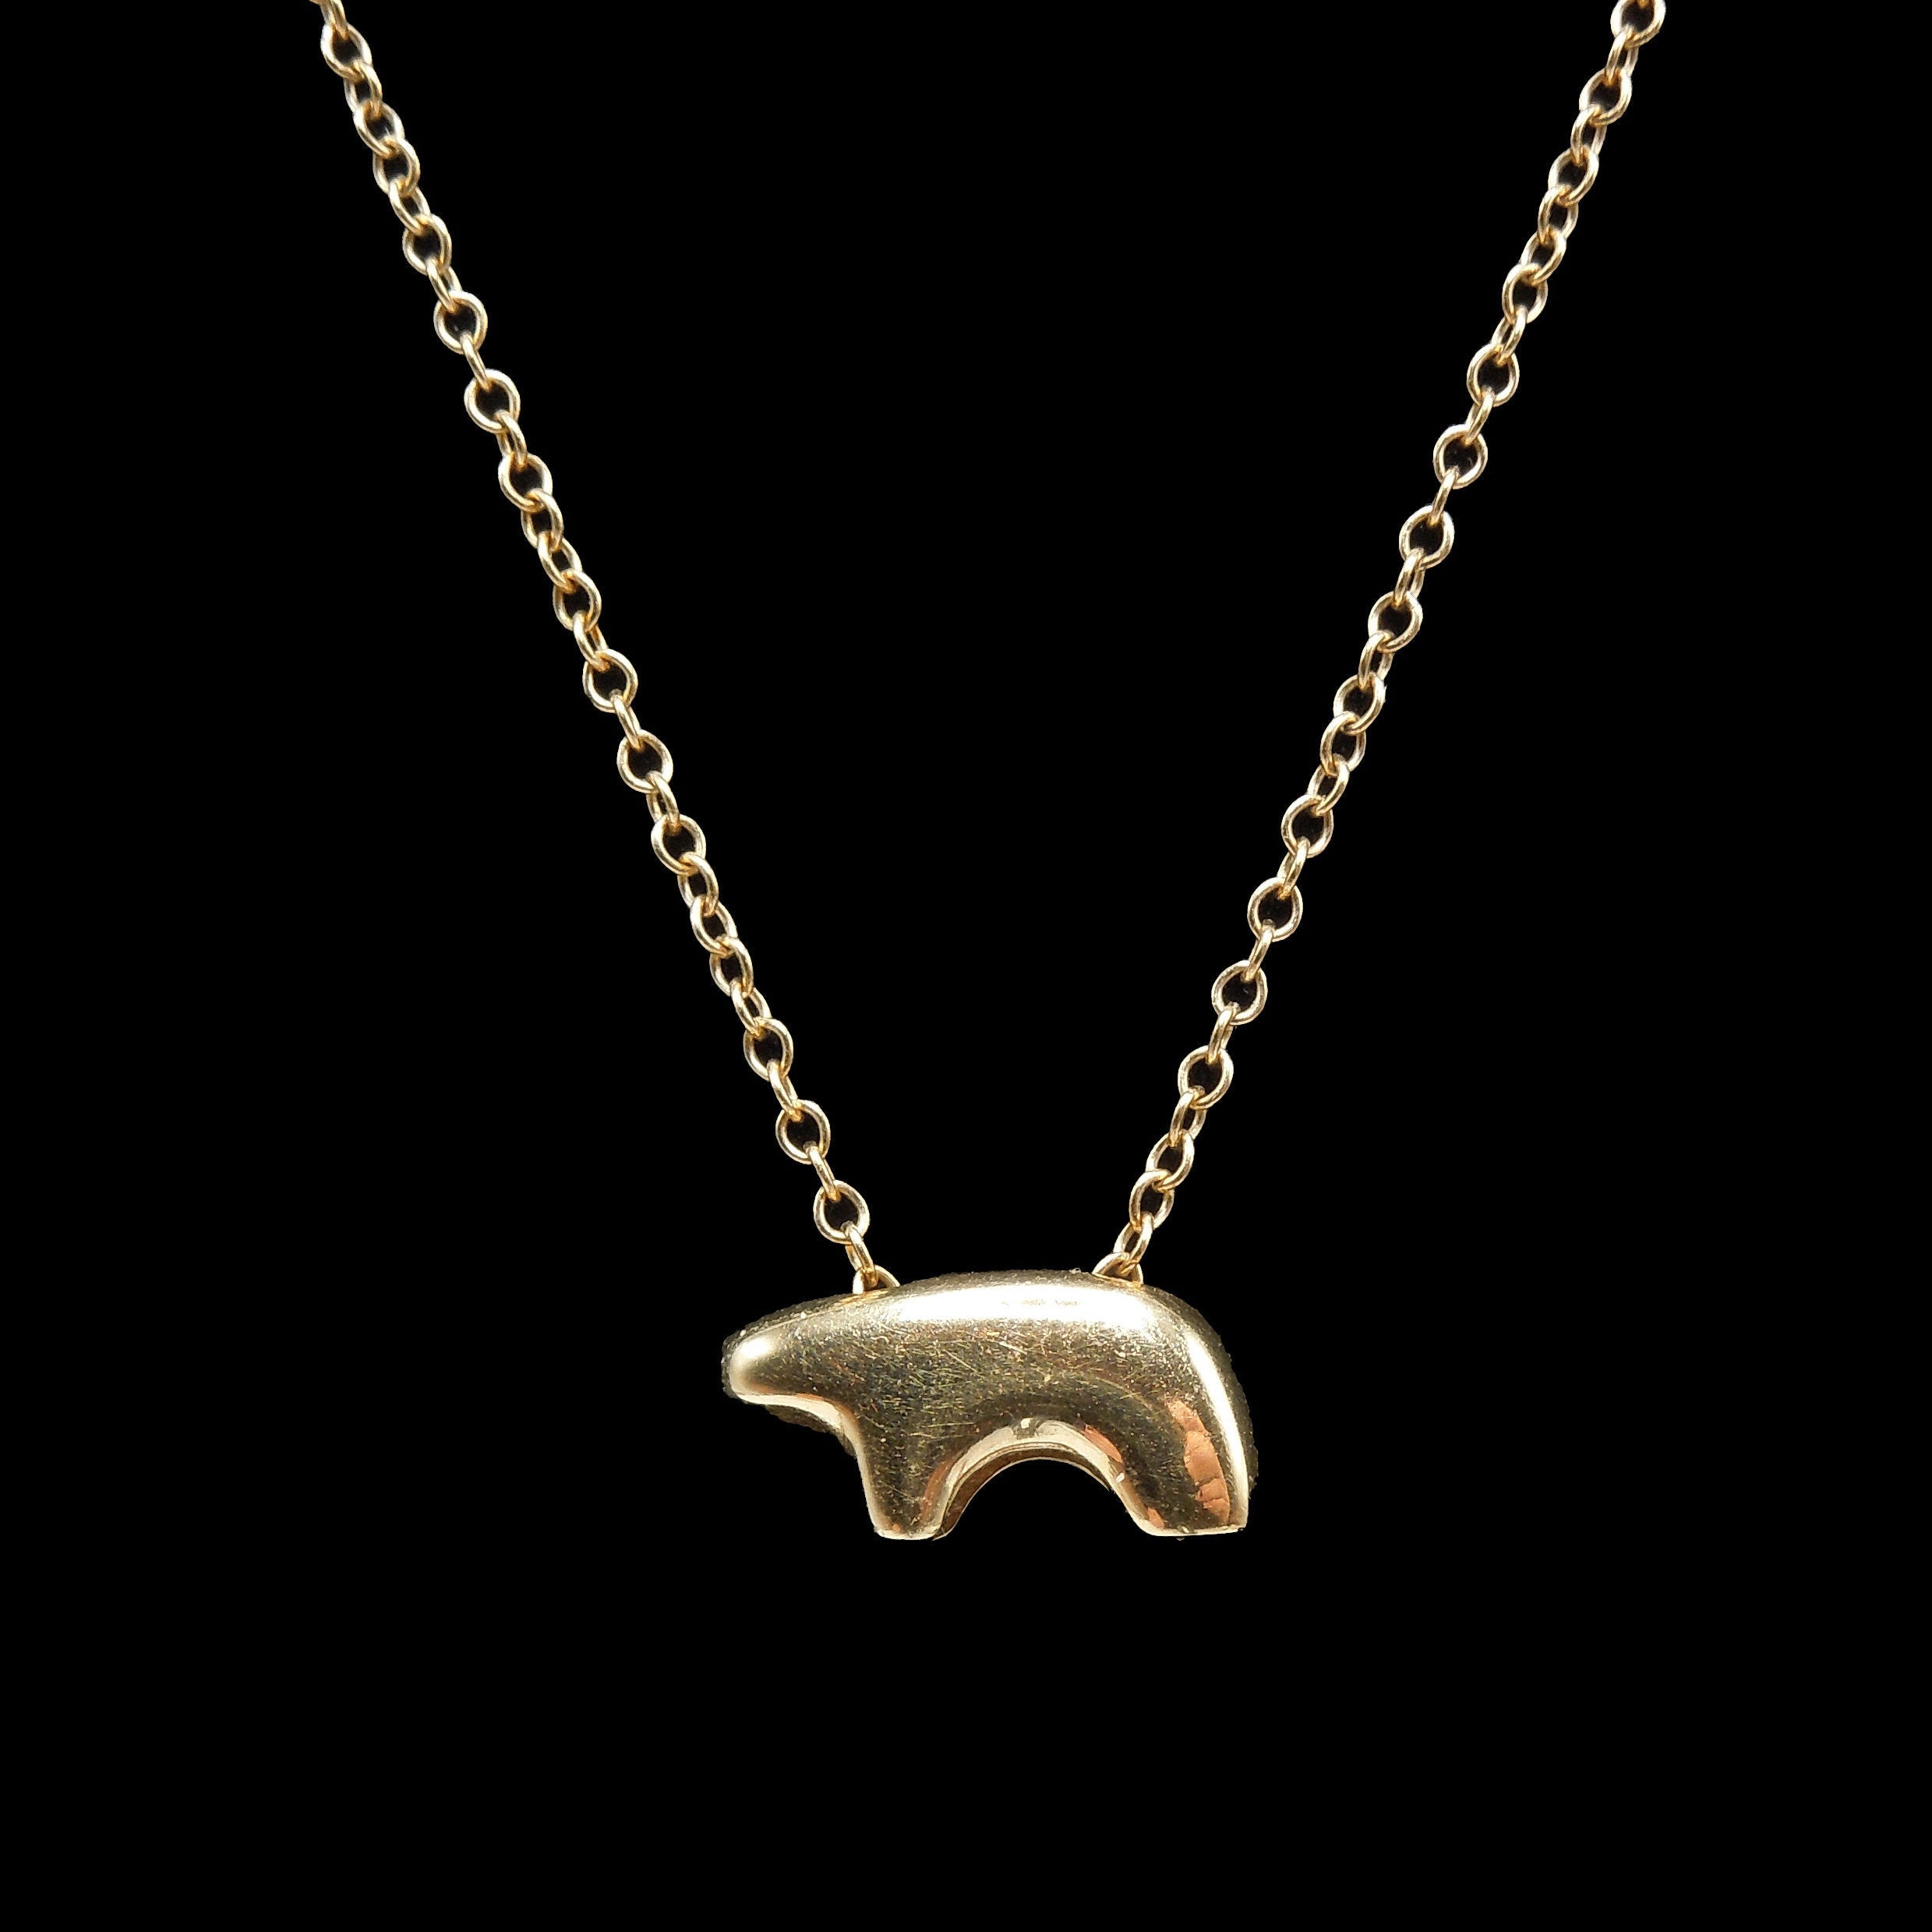 Stylized Navajo Bear Necklace in 14K Yellow Gold